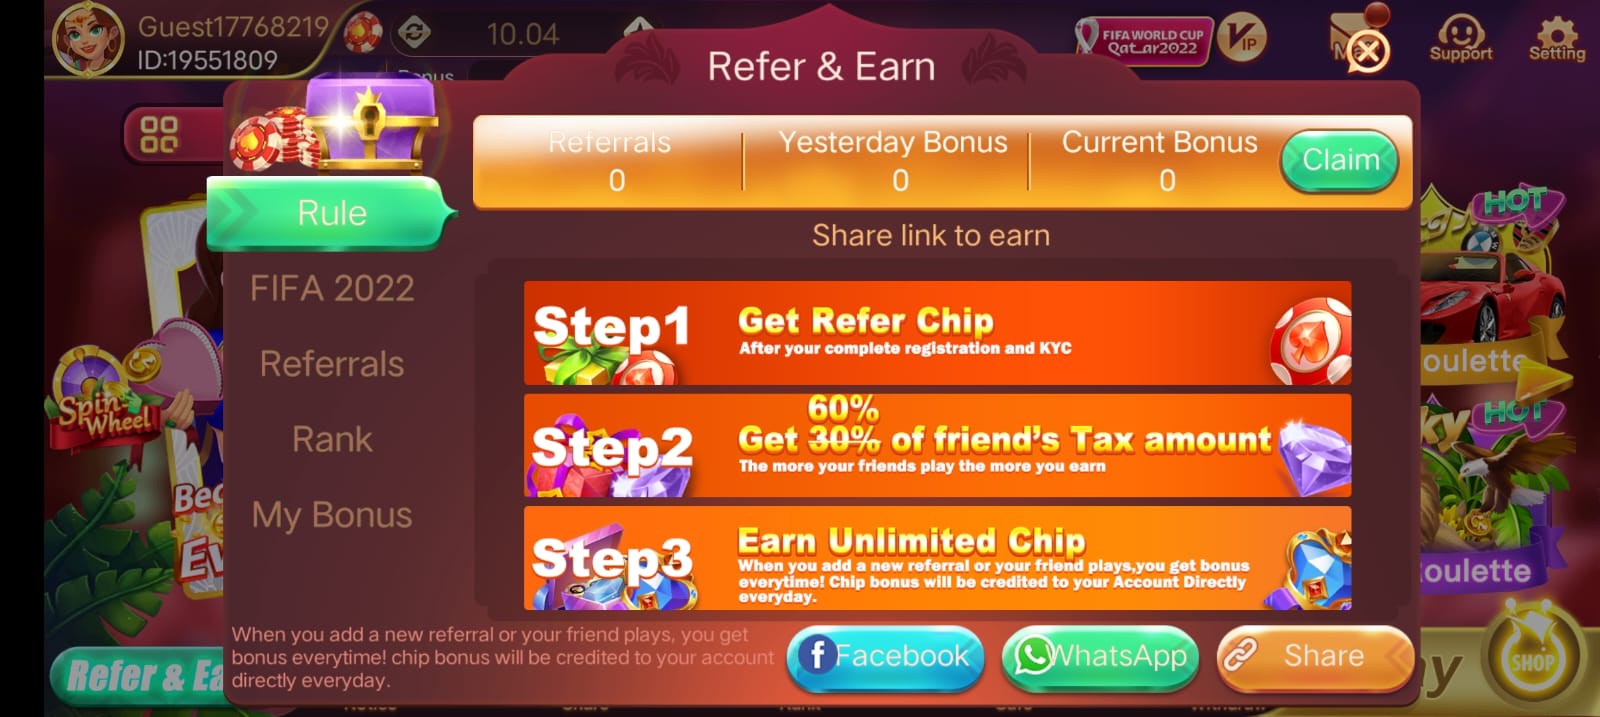 REFER AND EARN IN RUMMY YES APP